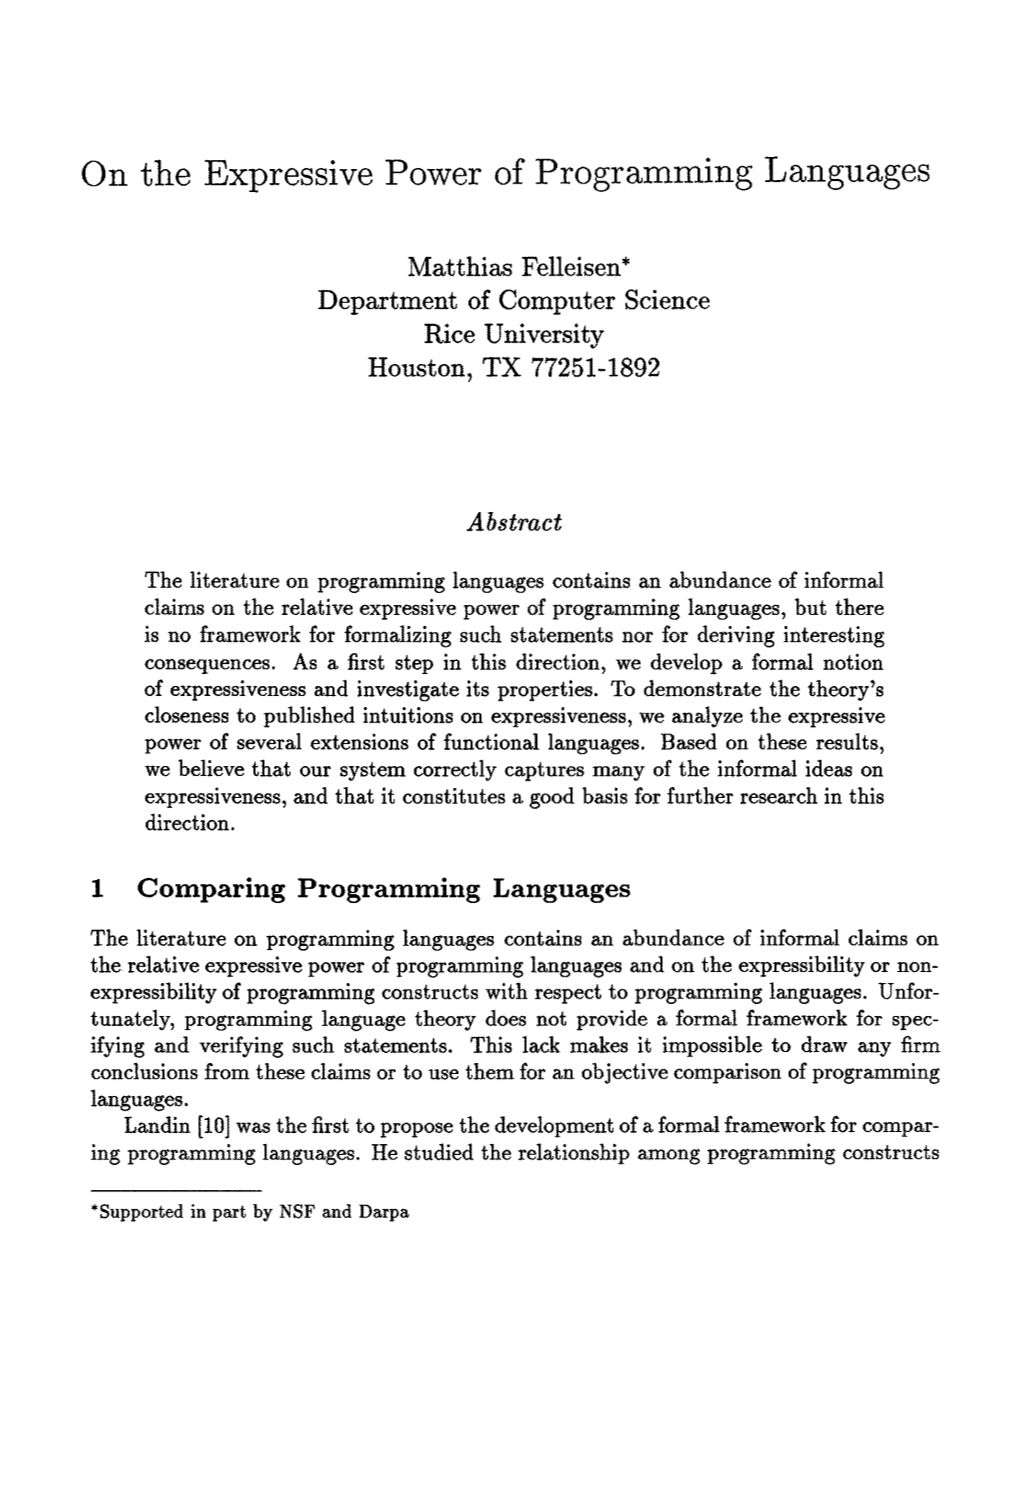 On the Expressive Power of Programming Languages